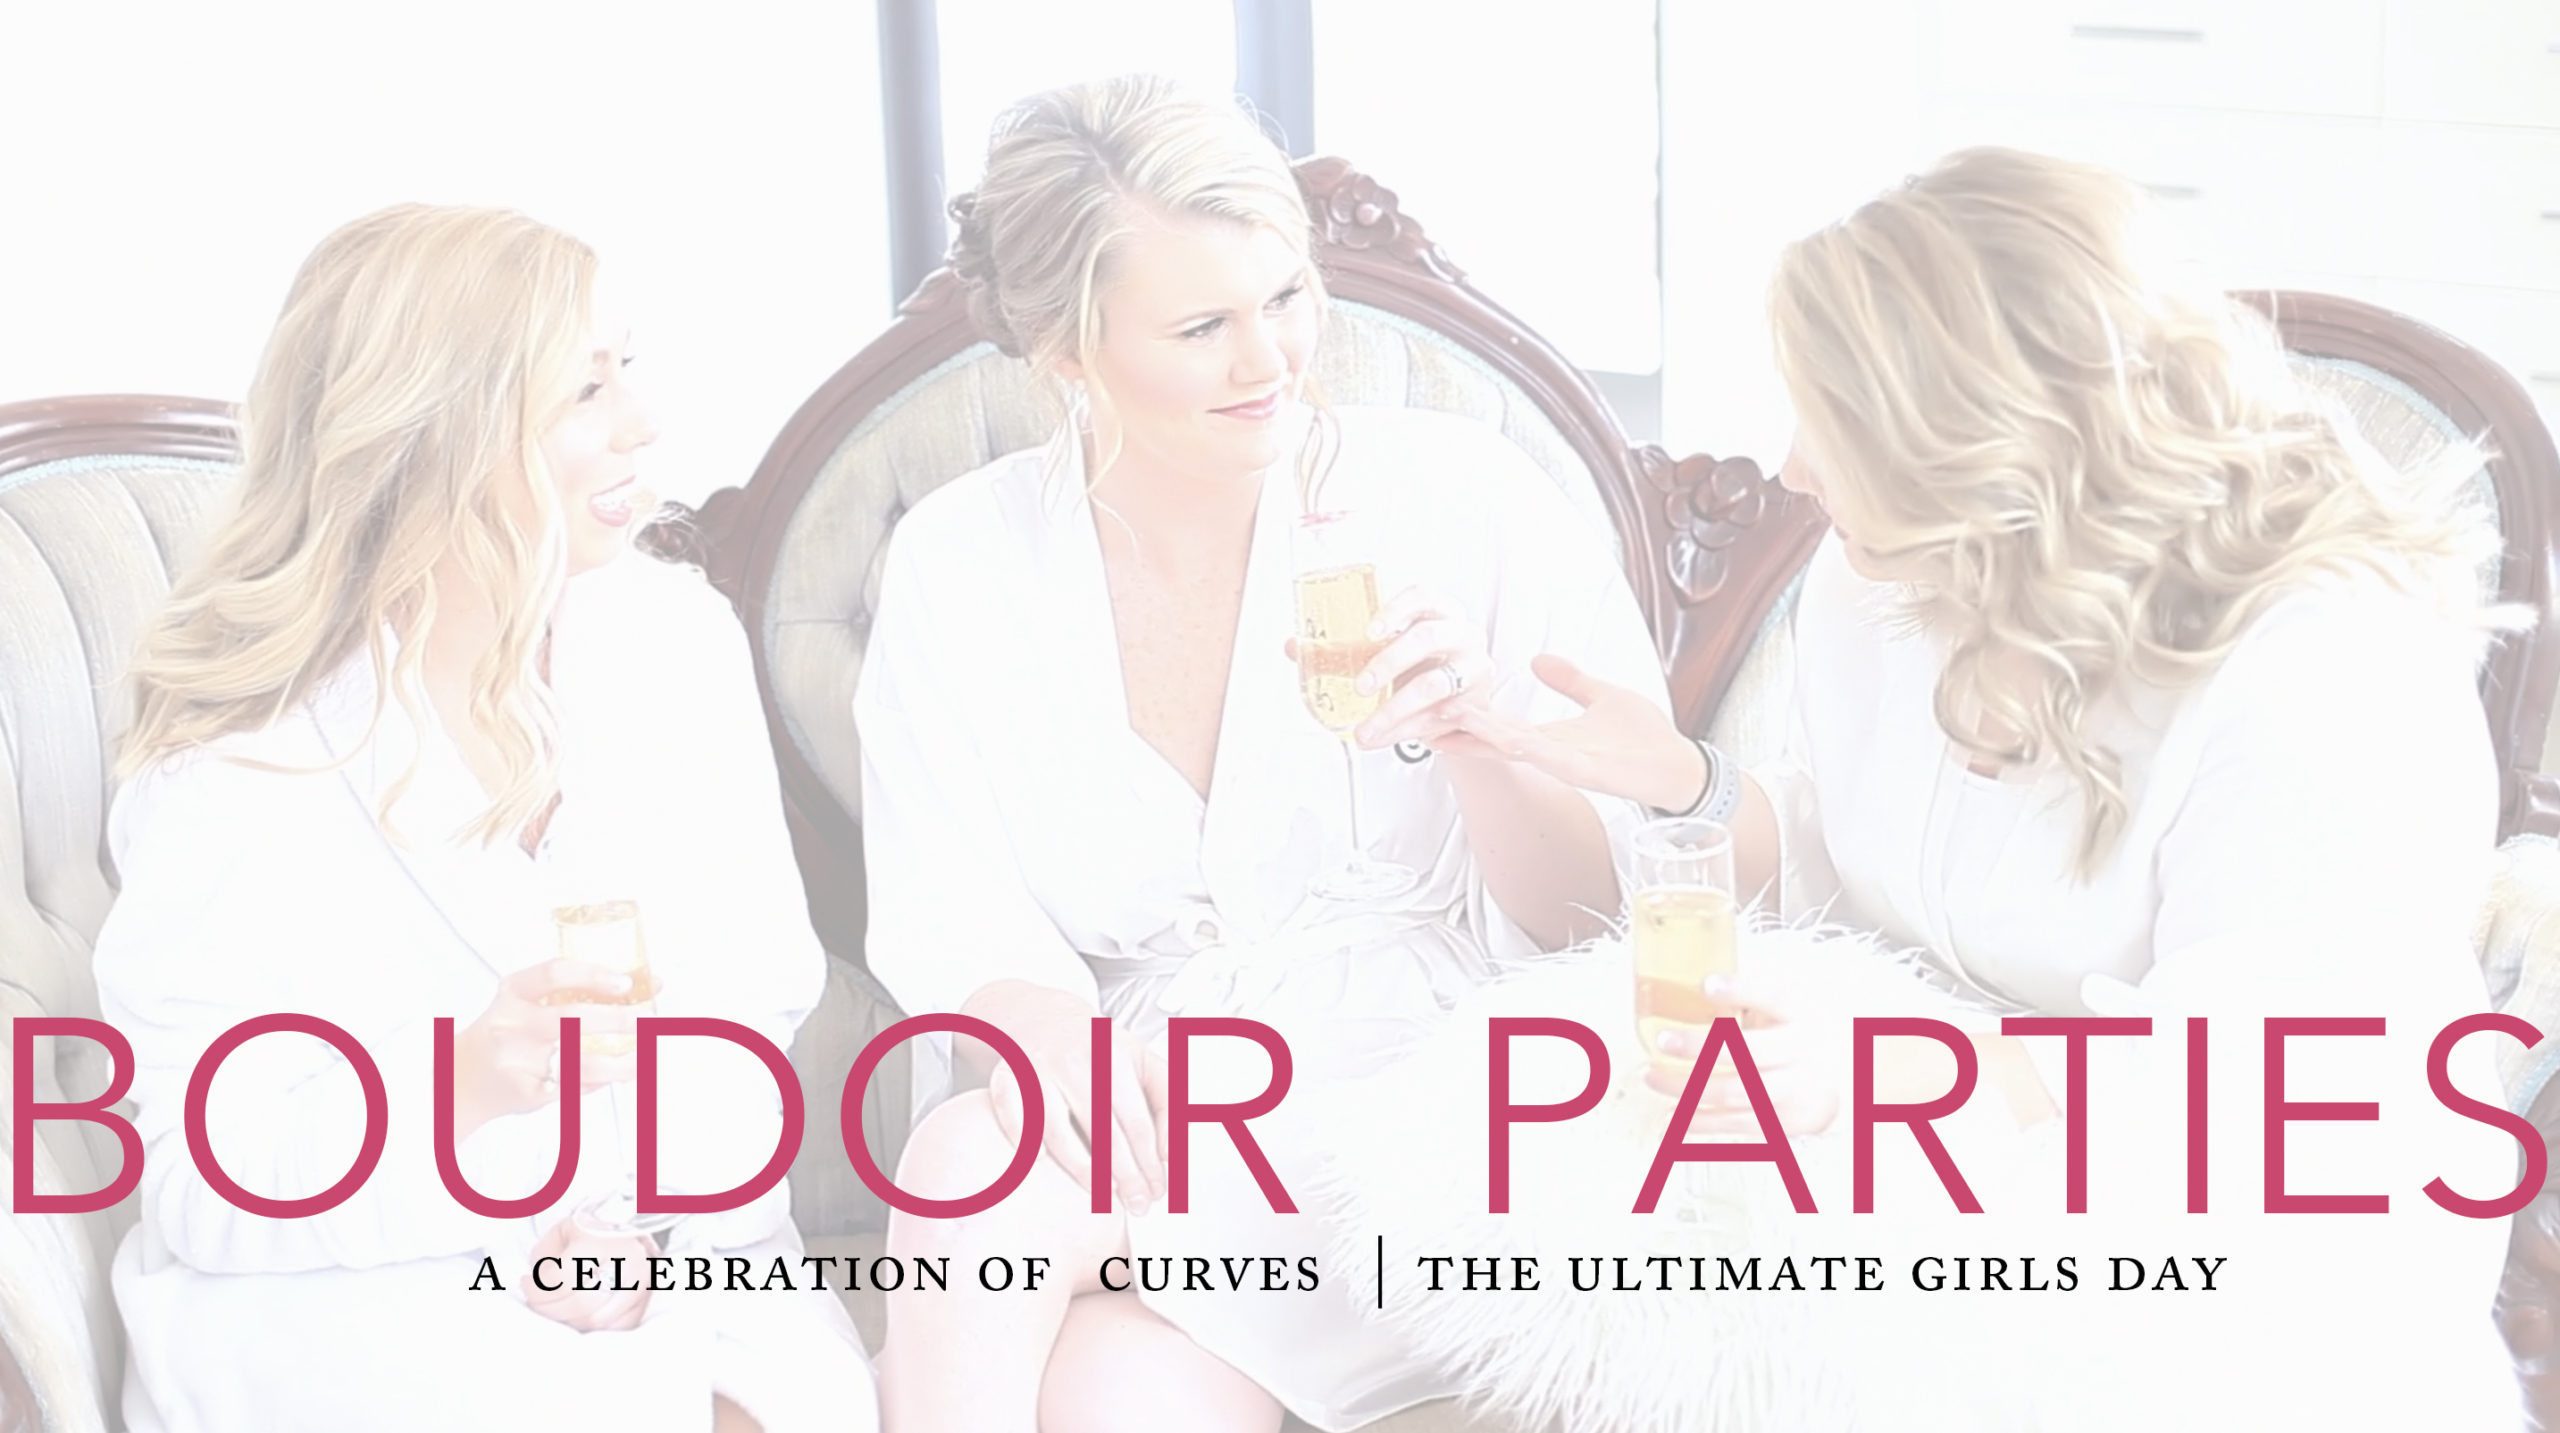 BOUDOIR PARTIES | THE ULTIMATE GIRLS DAY